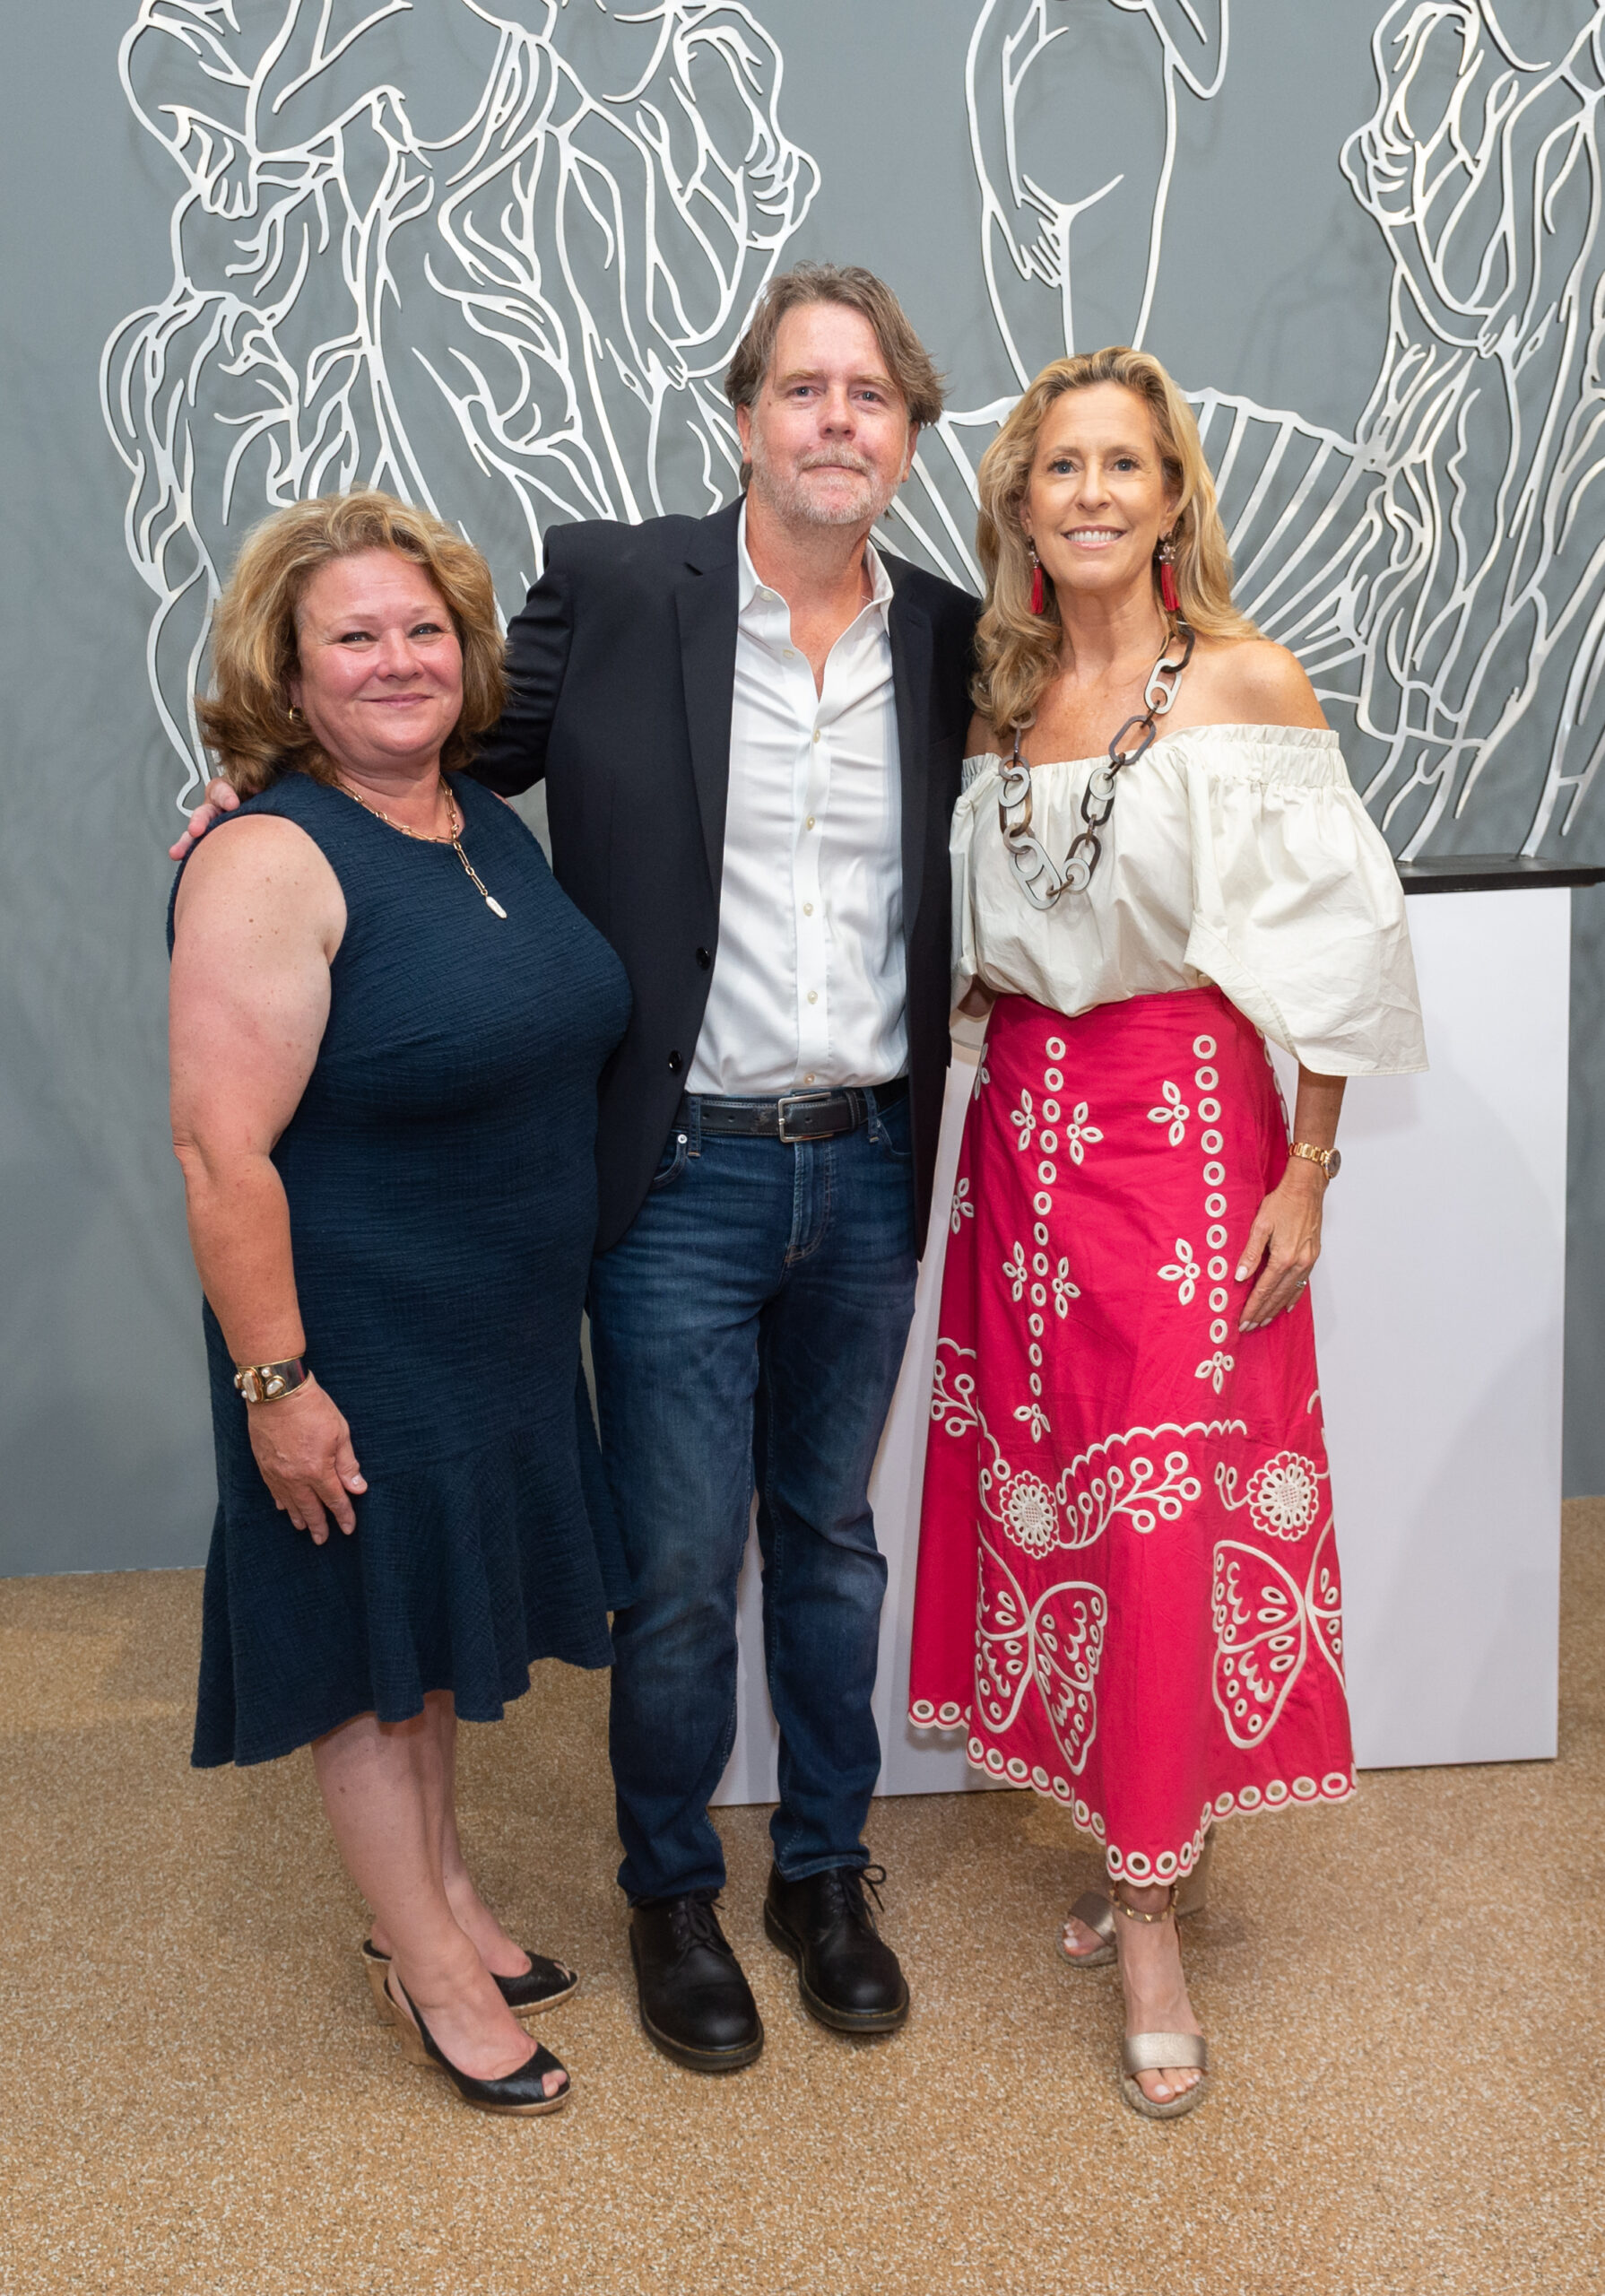 Southampton Art Center's new director Christina Mossaides Strassfield, left, with former SAC director Tom Dunn and Simone Levinson, Simone Levinson, SAC's founding co-chair, at the opening of 